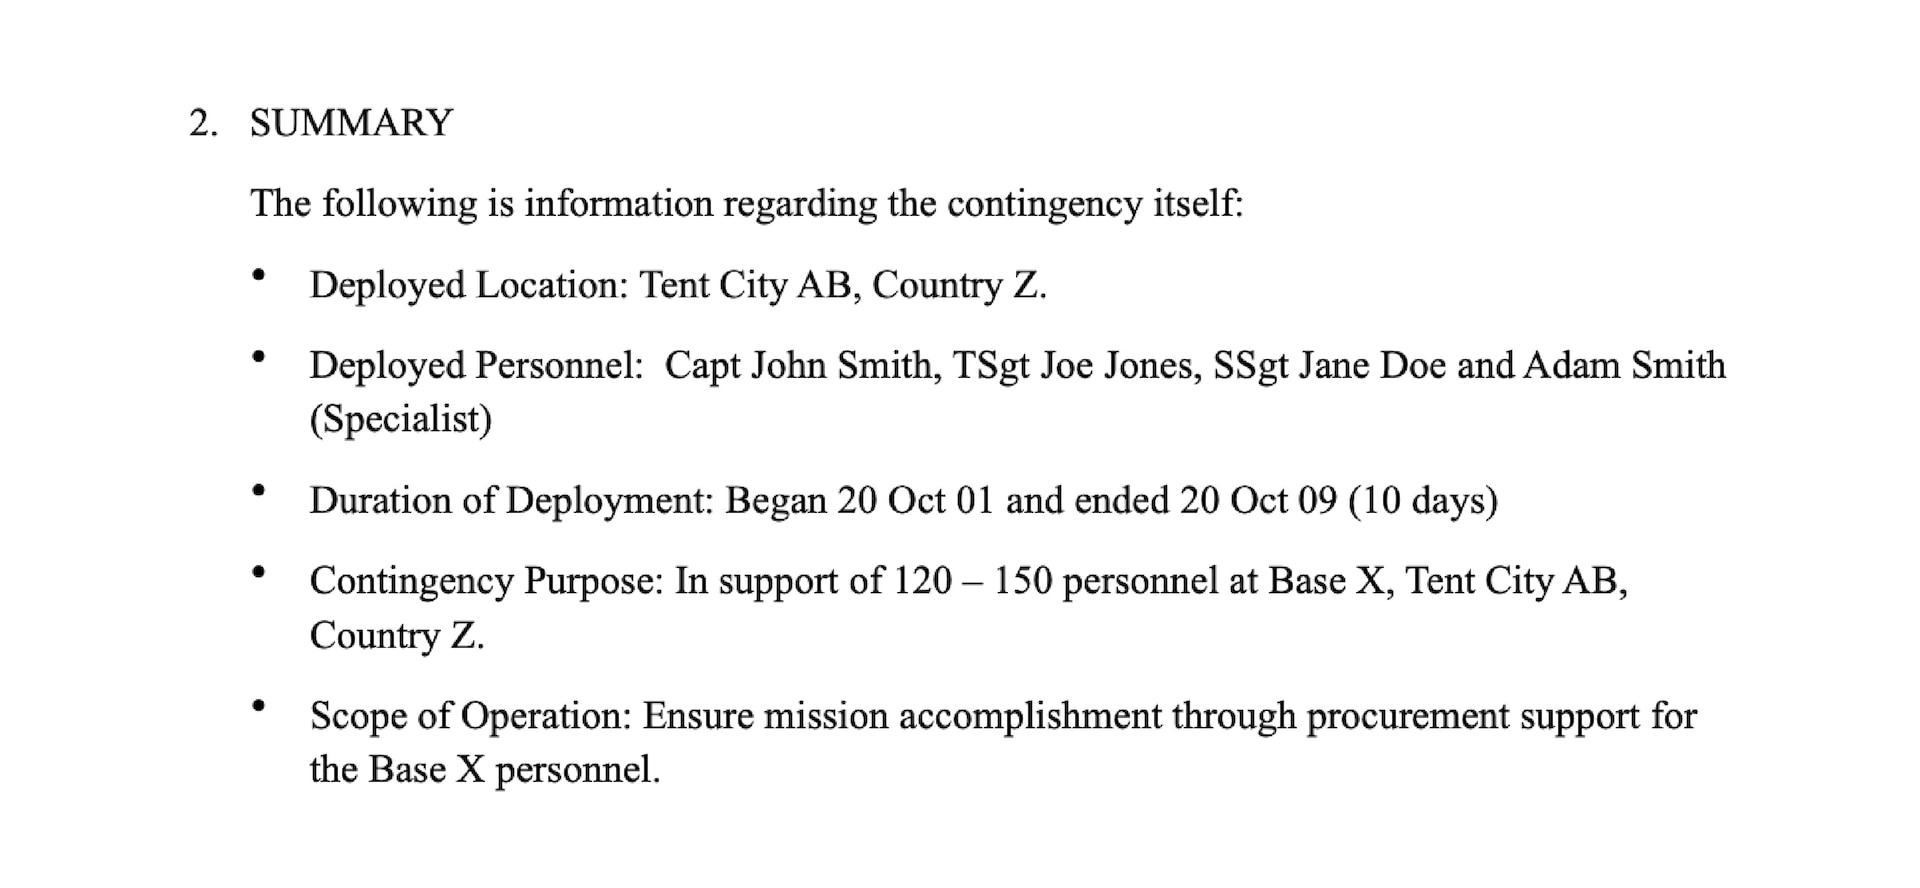 Summary section from sample AAR. 2. SUMMARY. The following is information regarding the contingency itself: Deployed Location: Camp Pendleton, CA, USA. Deployed Personnel: CWO John Smith, I MEF Communication Strategy and Operations (COMMSTRAT) section, Major Subordinate Command (MSC) COMMSTRAT sections. Duration of Deployment: Began 26 February and ended 08 March (10 days). Contingency Purpose: In support of MEFEX 18 at Camp Pendleton, CA, USA. Scope of Operation: The COMMSTRAT focus of effort for MEFEX 18 was integration into the targeting process, responsive media operations and refinement of information environment assessment process.